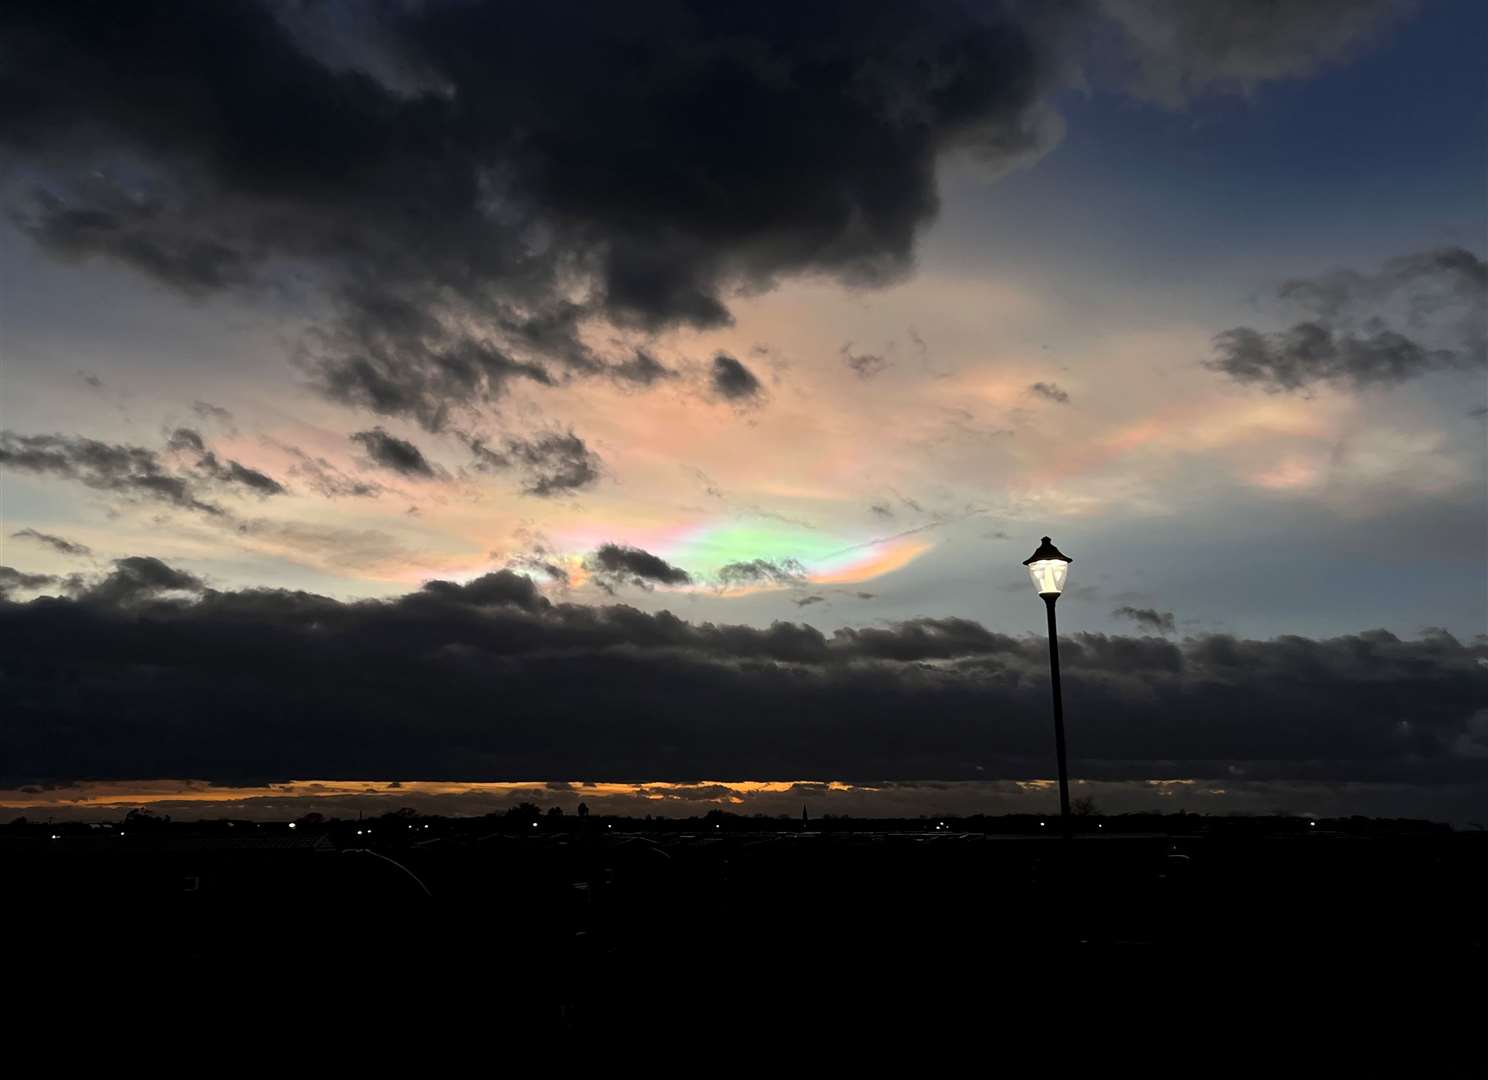 The 'rainbow clouds' were also spotted along the promenade between Herne Bay and Whitstable. Photo: Josh v.Graevenitz